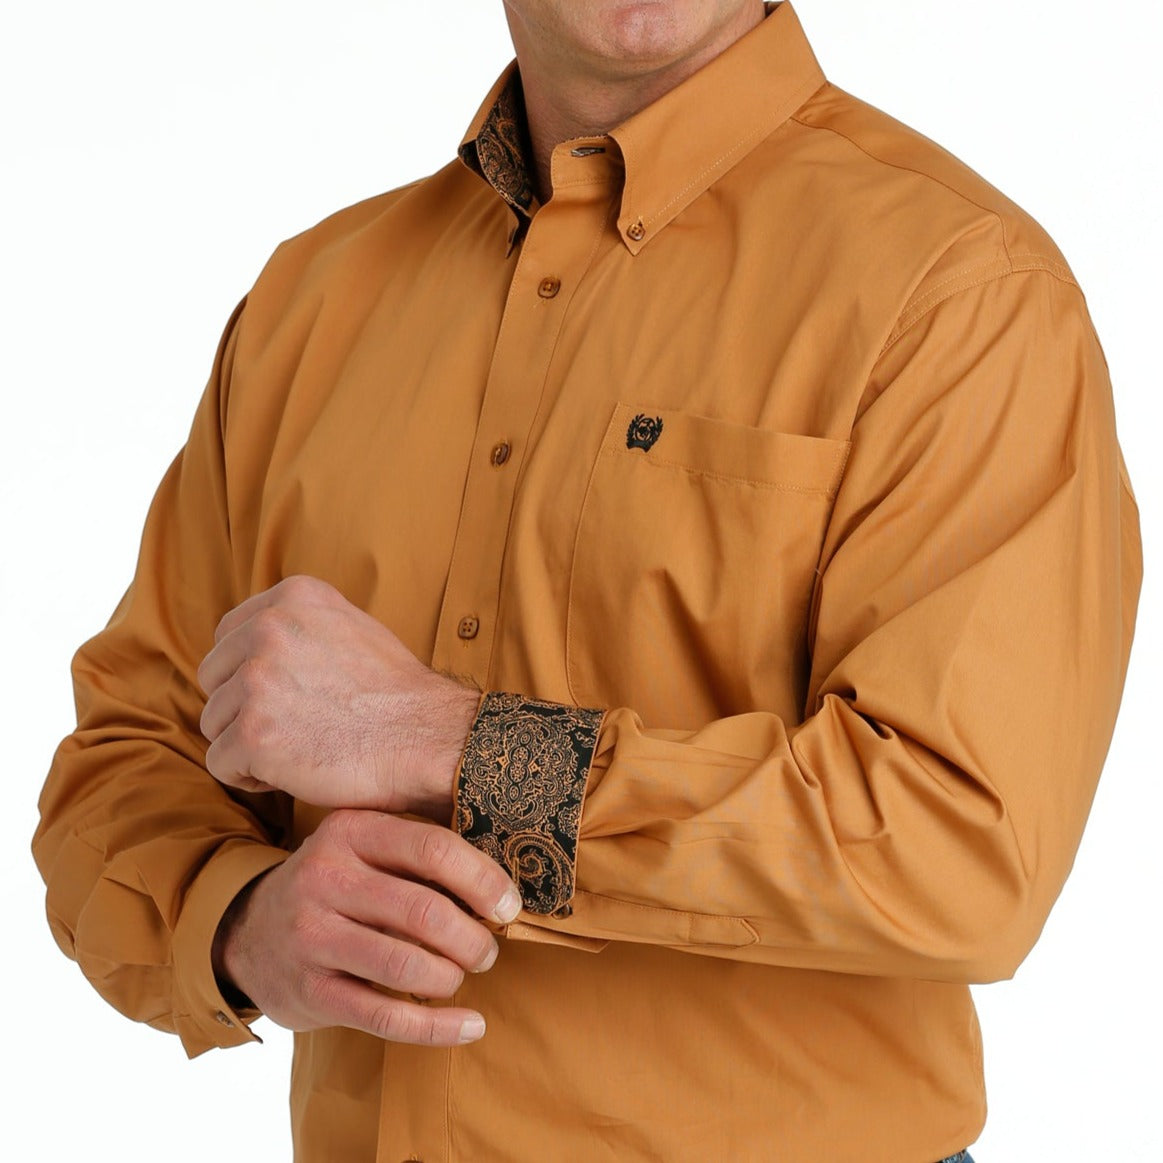 Cinch Men's Classic Fit Solid Gold Western Button Down Shirt